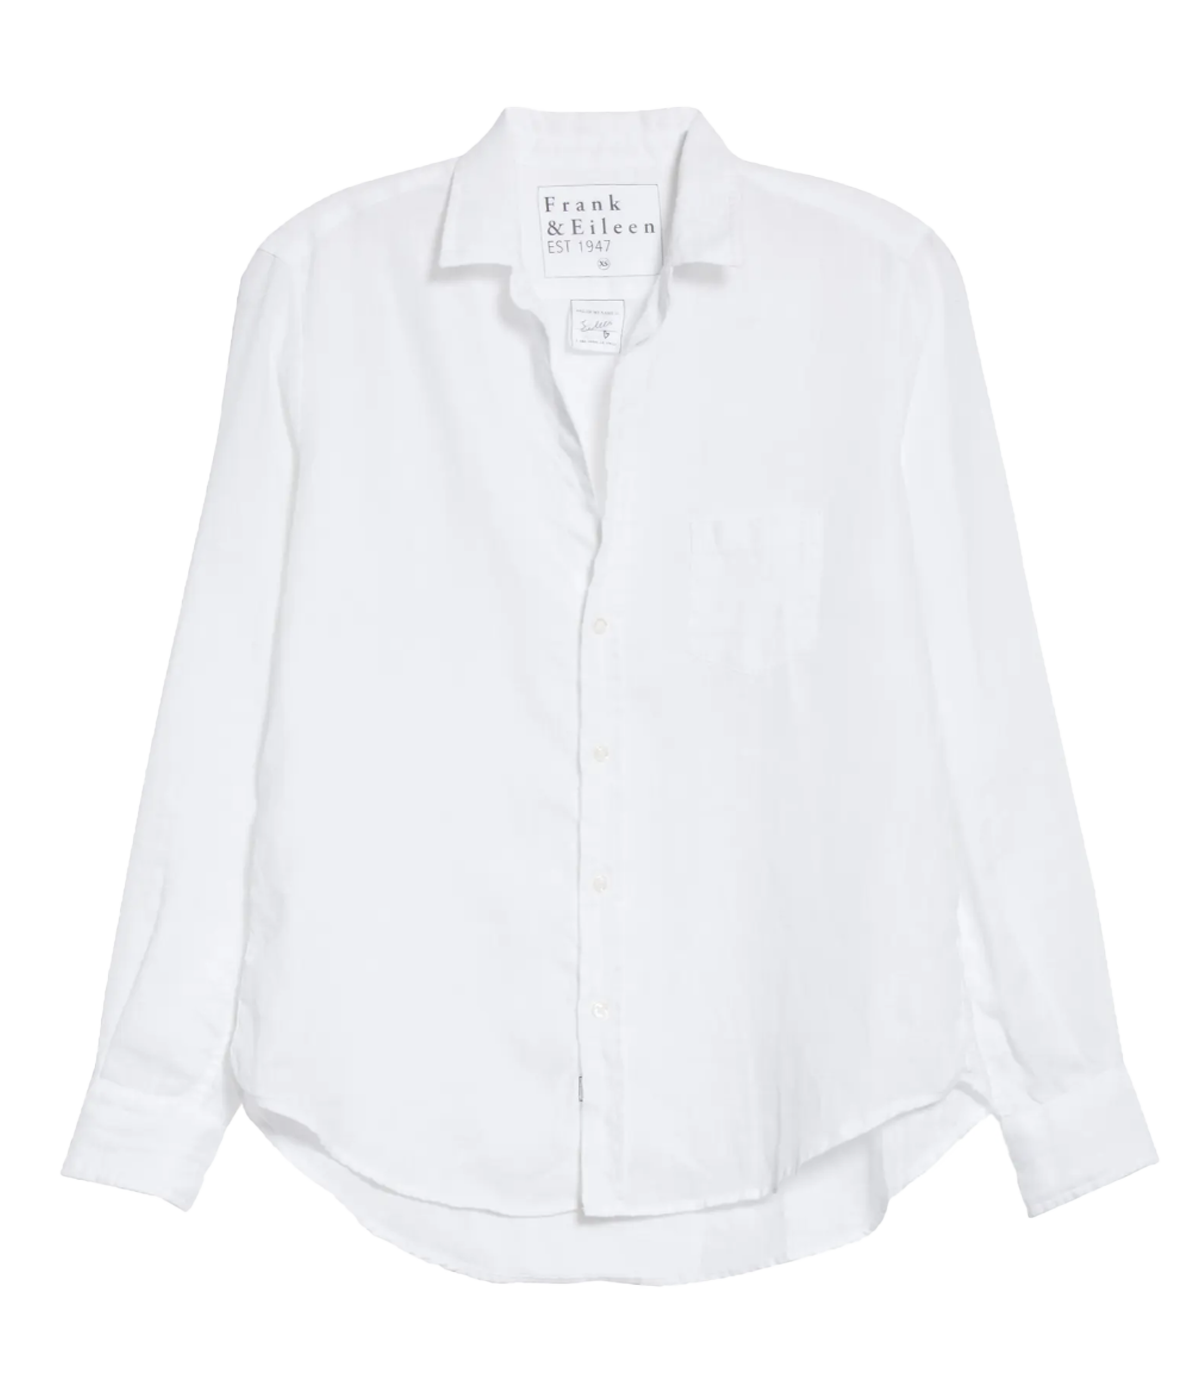 A classic white linen button down in a white colourway, with collar detailing and front button down detail. Boyfriend white shirt, everyday basic, classic white shirt, 100% linen, ,made in USA, bra friendly. 